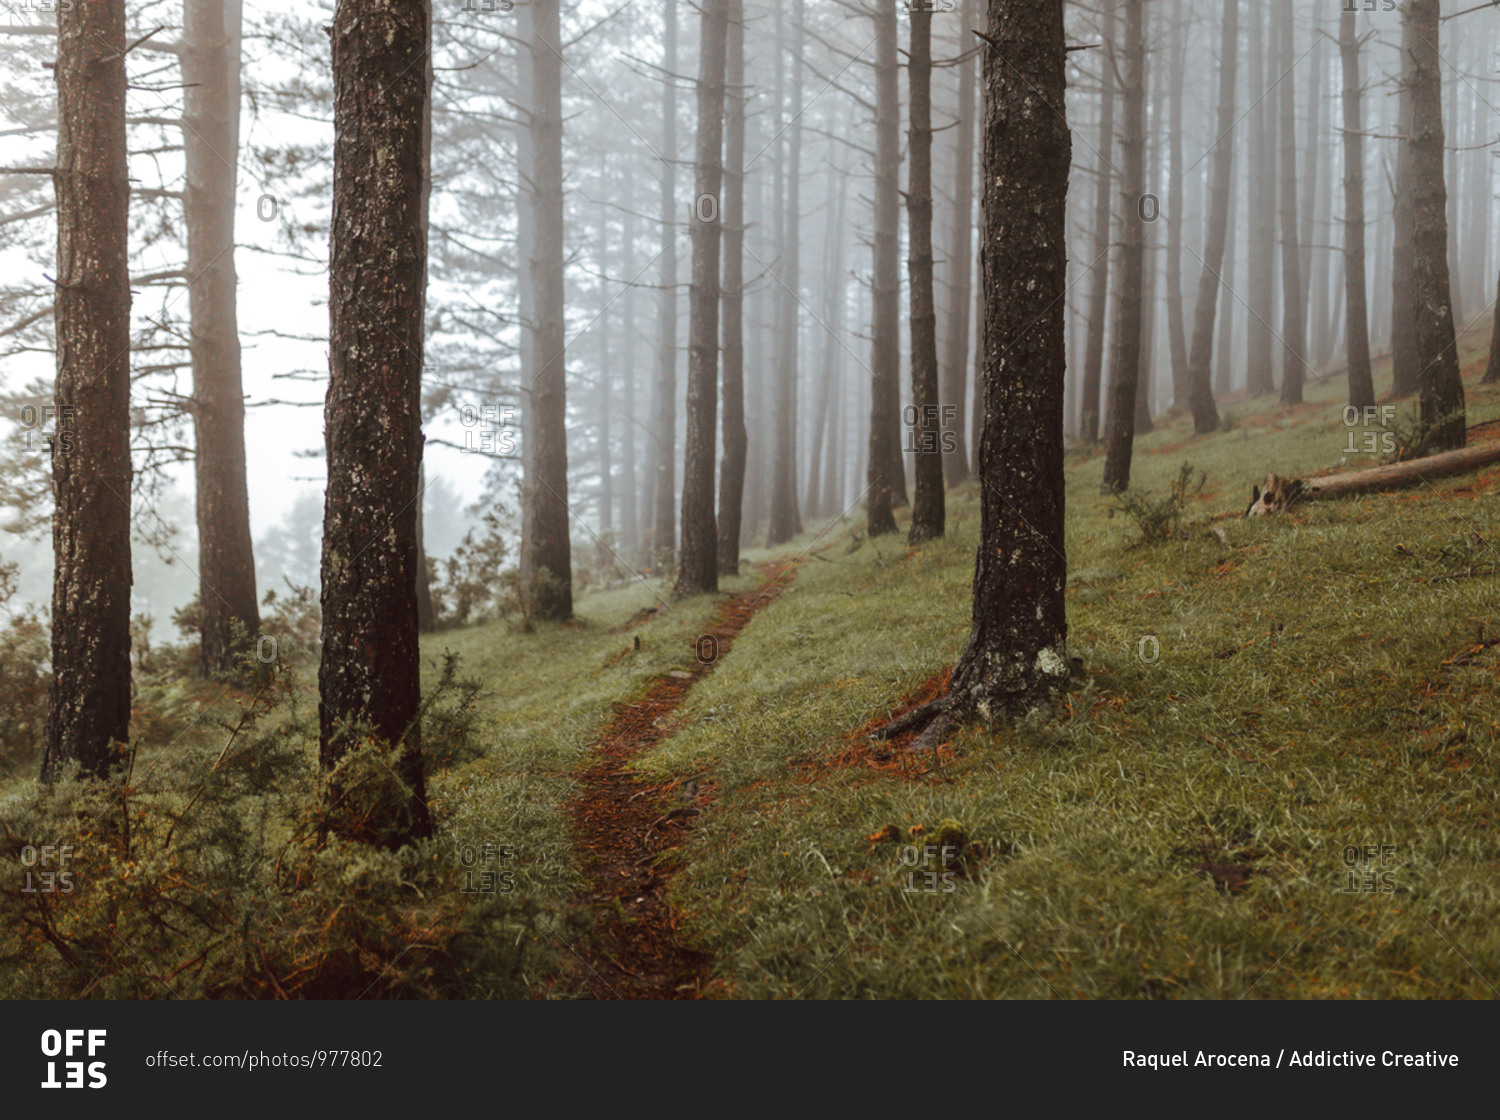 Gloomy scenery of narrow path surrounded by tall evergreen trees growing in misty wood